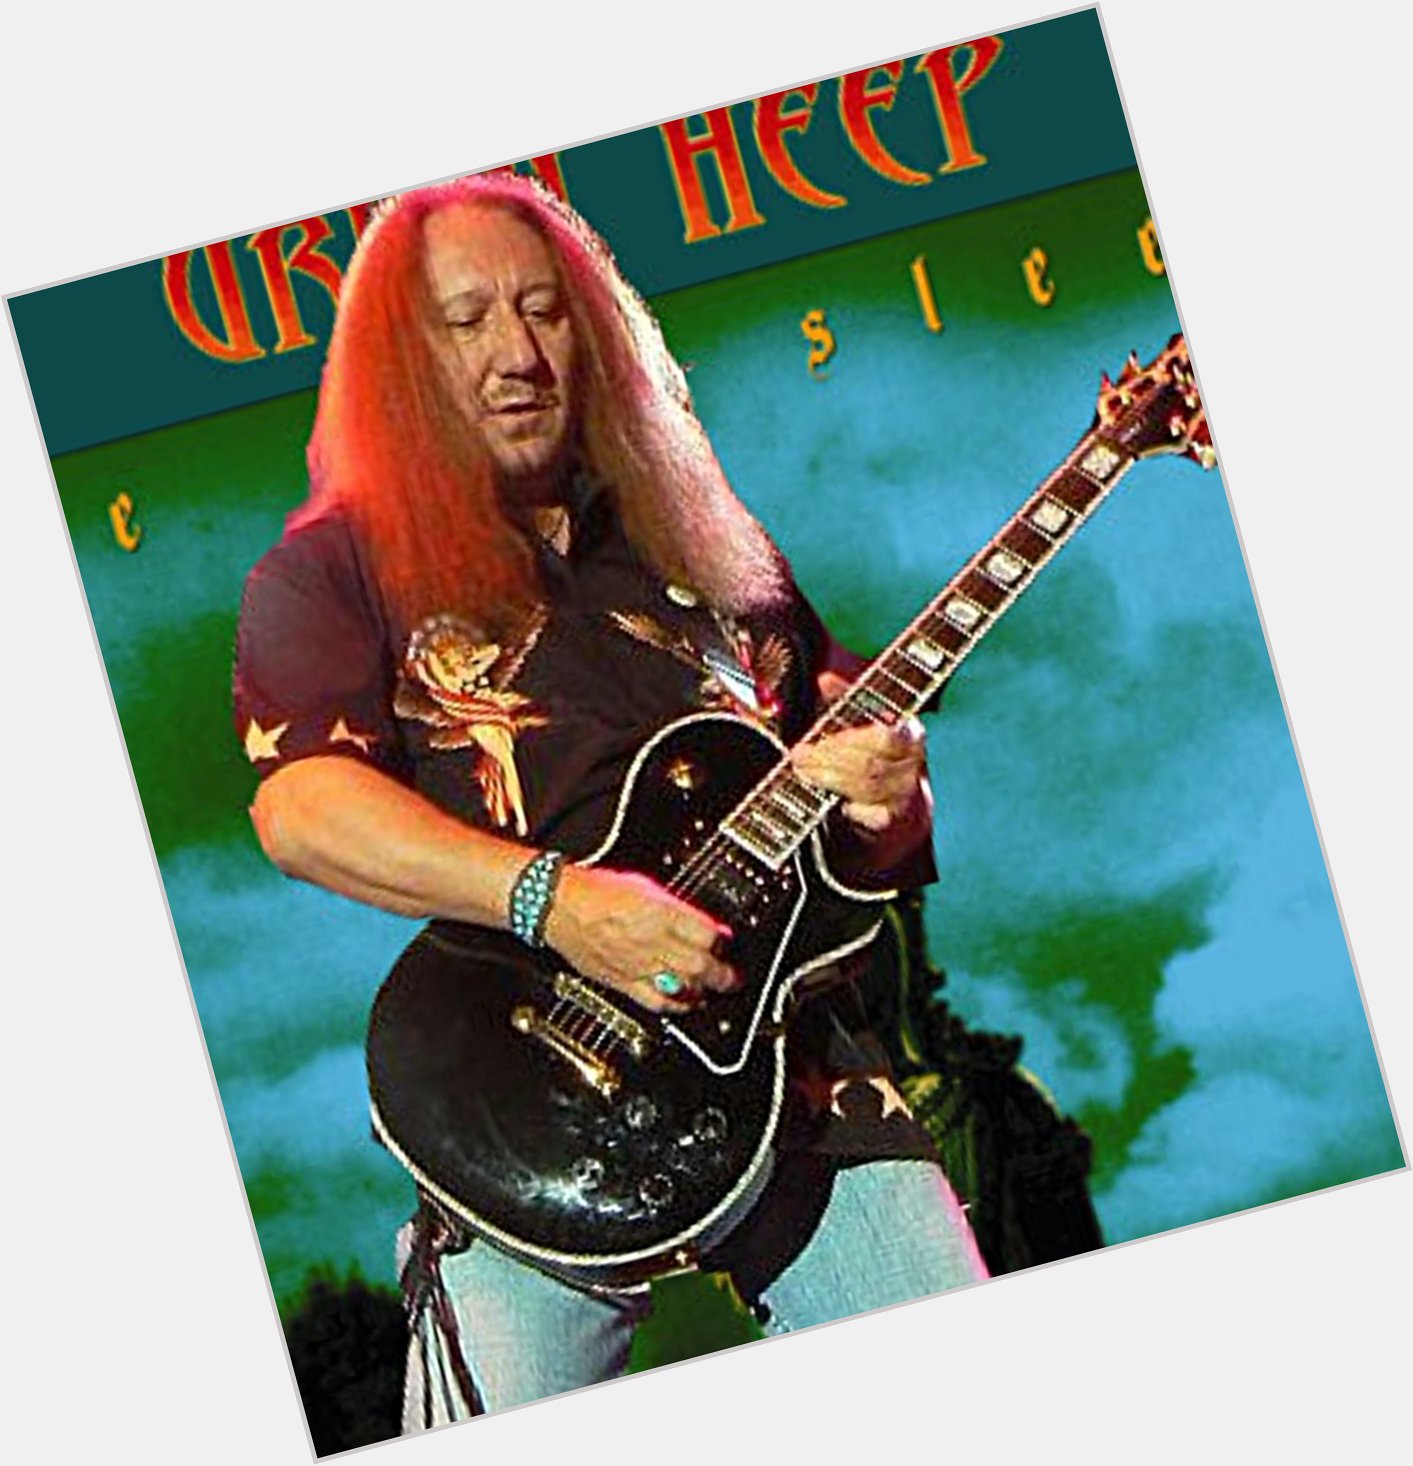 
Happy 70th birthday to Mick Box, the only original member of Uriah Heep. Still going strong! 